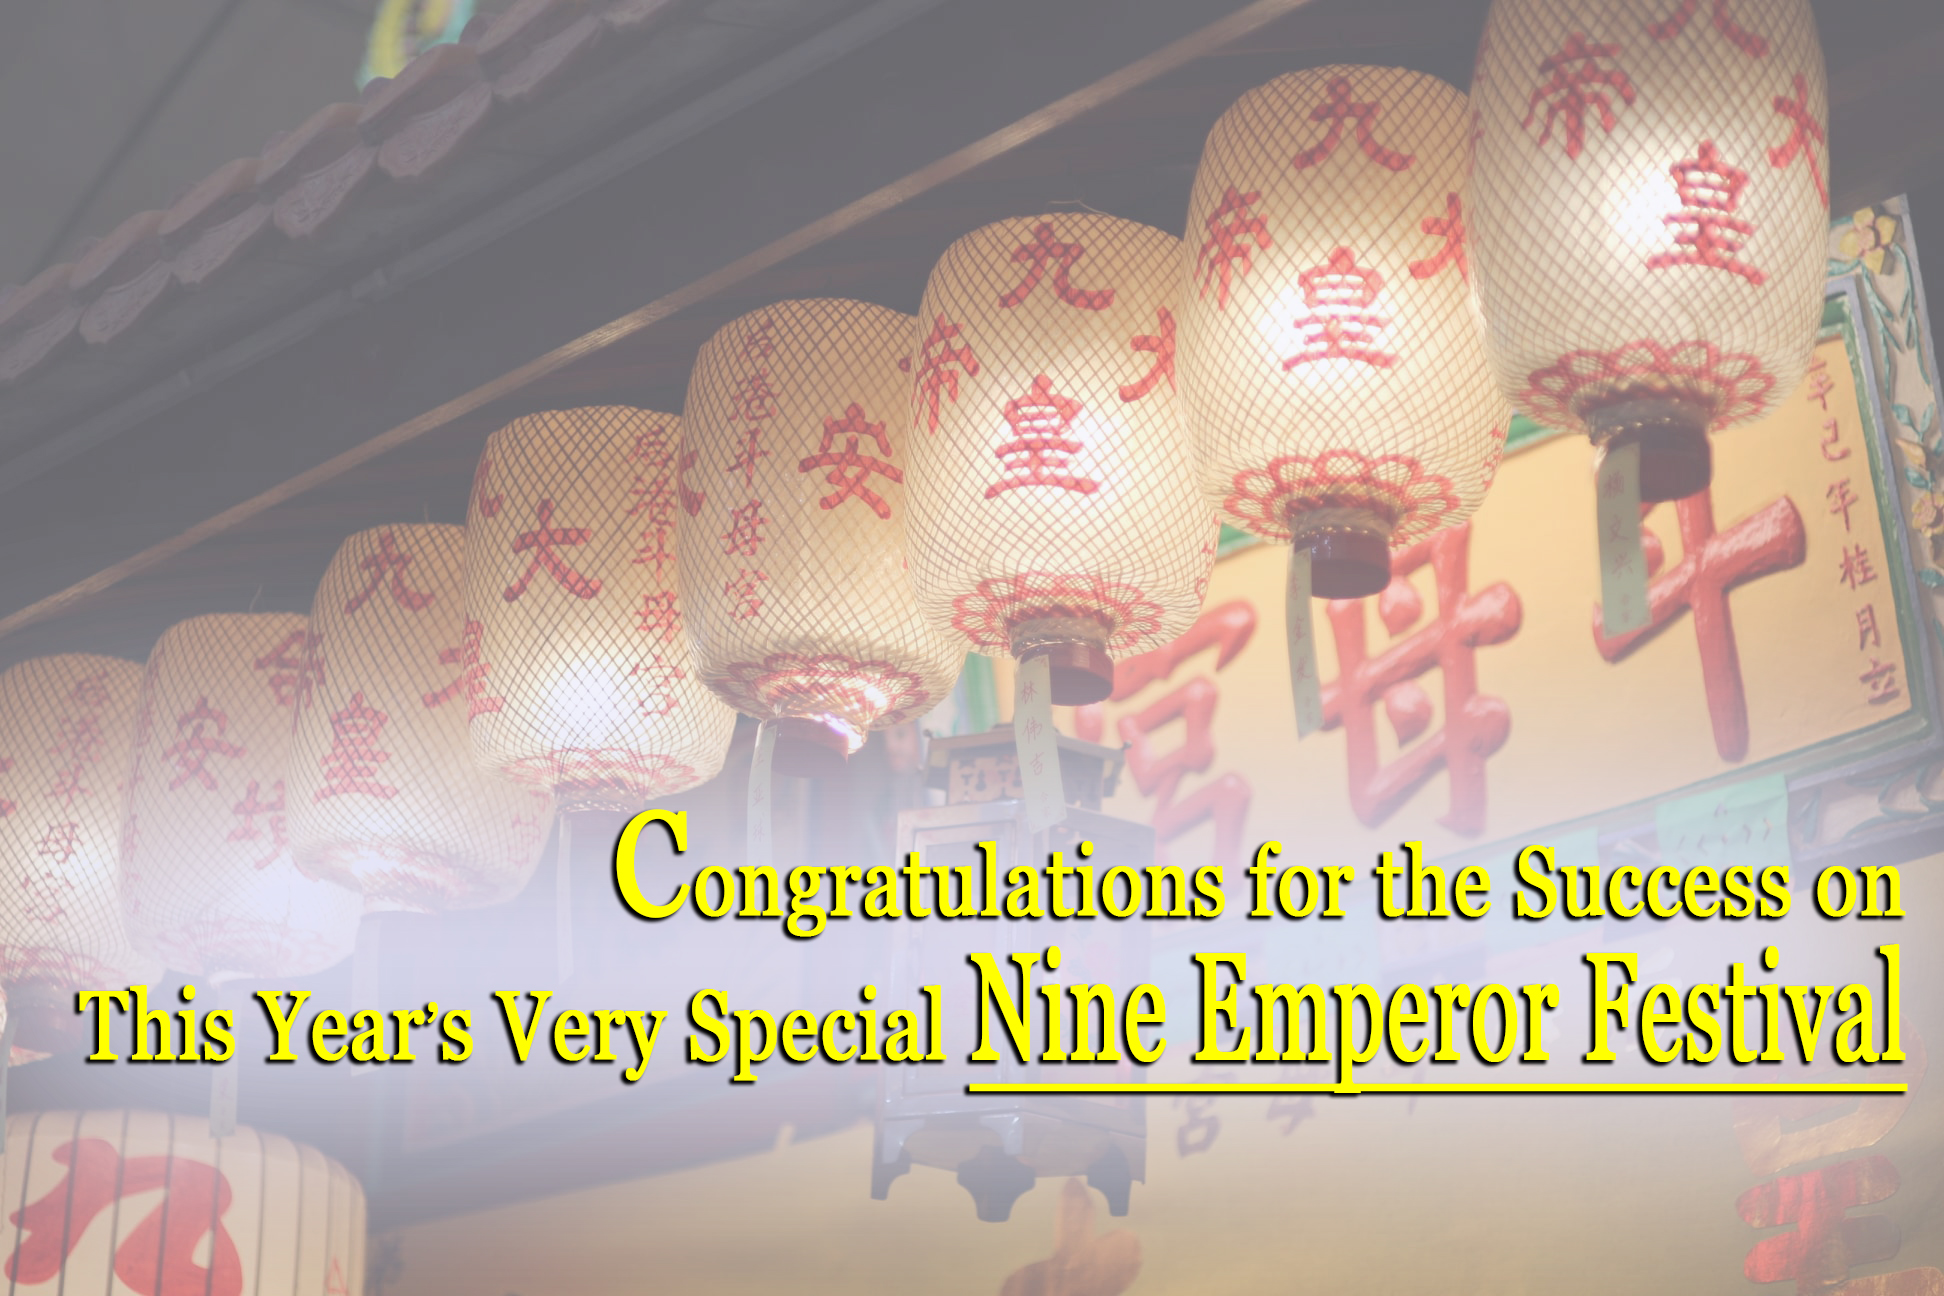 Congratulations for the Success on This Year’s Very Special Nine Emperor Festival